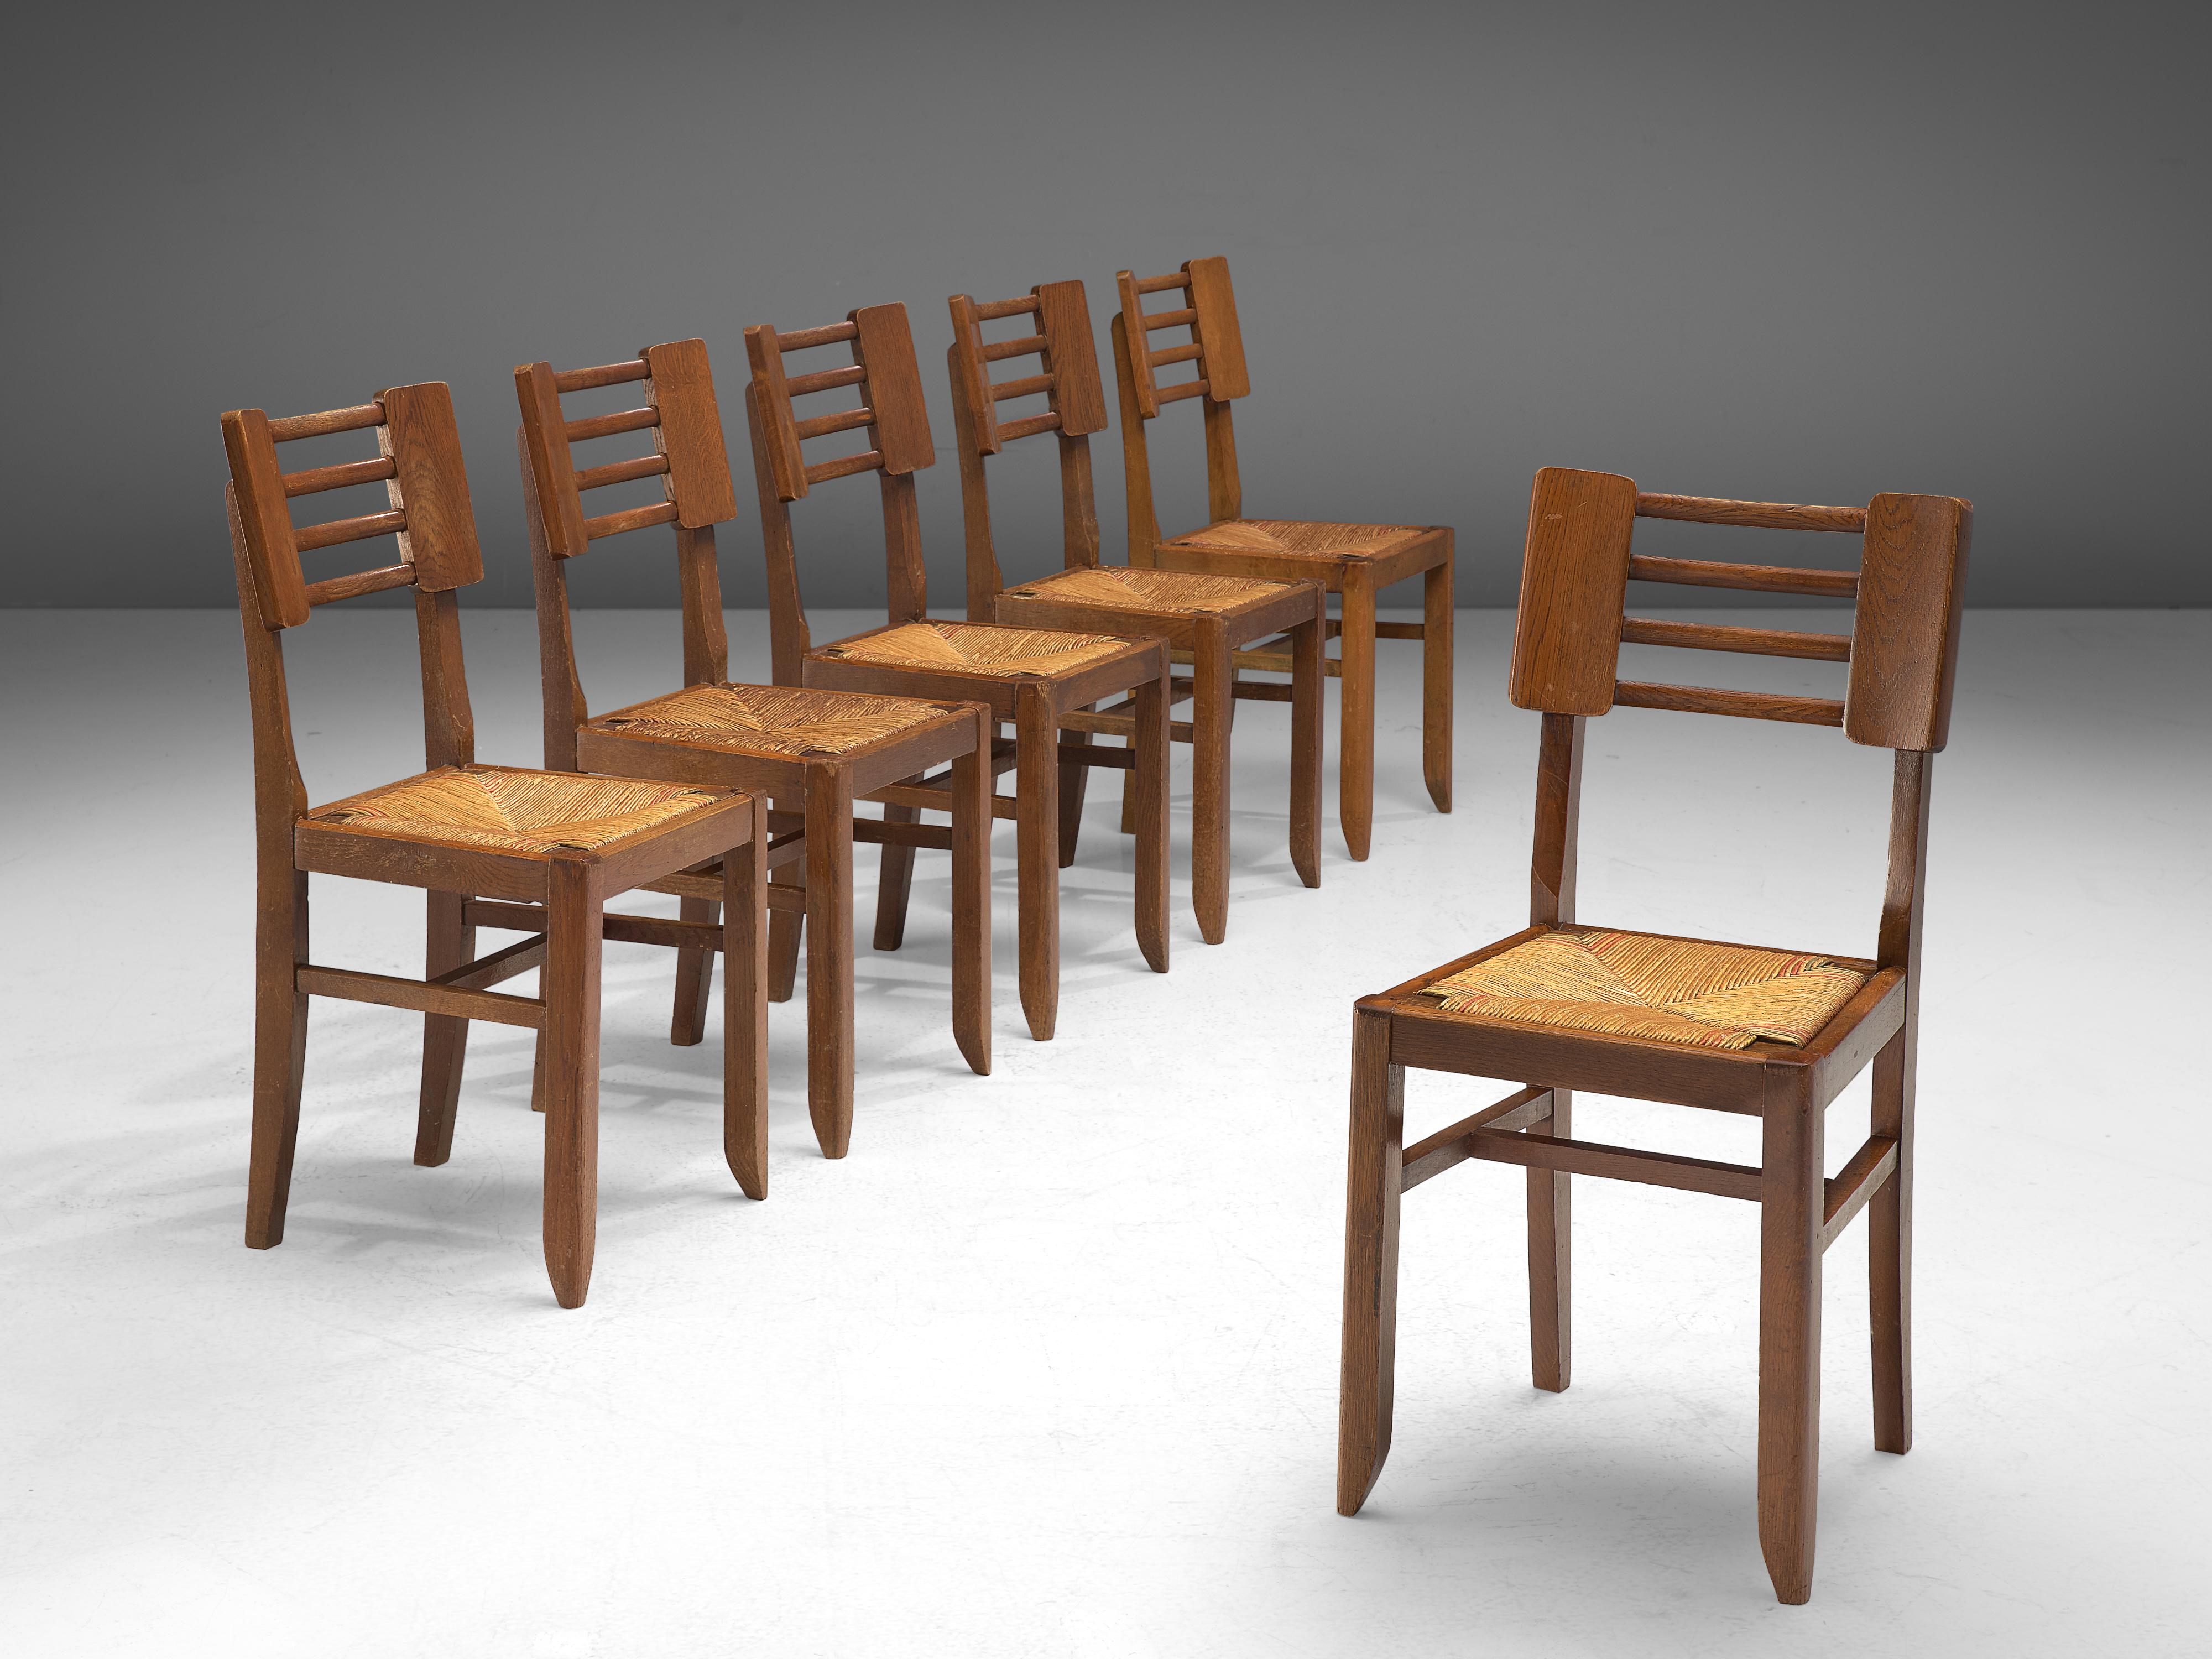 Pierre Cruège, set of six dining chairs, oak, straw, France, 1950s

Sculptural set of dining chairs by French designer and architect Pierre Cruège (1913-2003) that combines a modernist approach with Art Deco inspired forms. For instance, the model